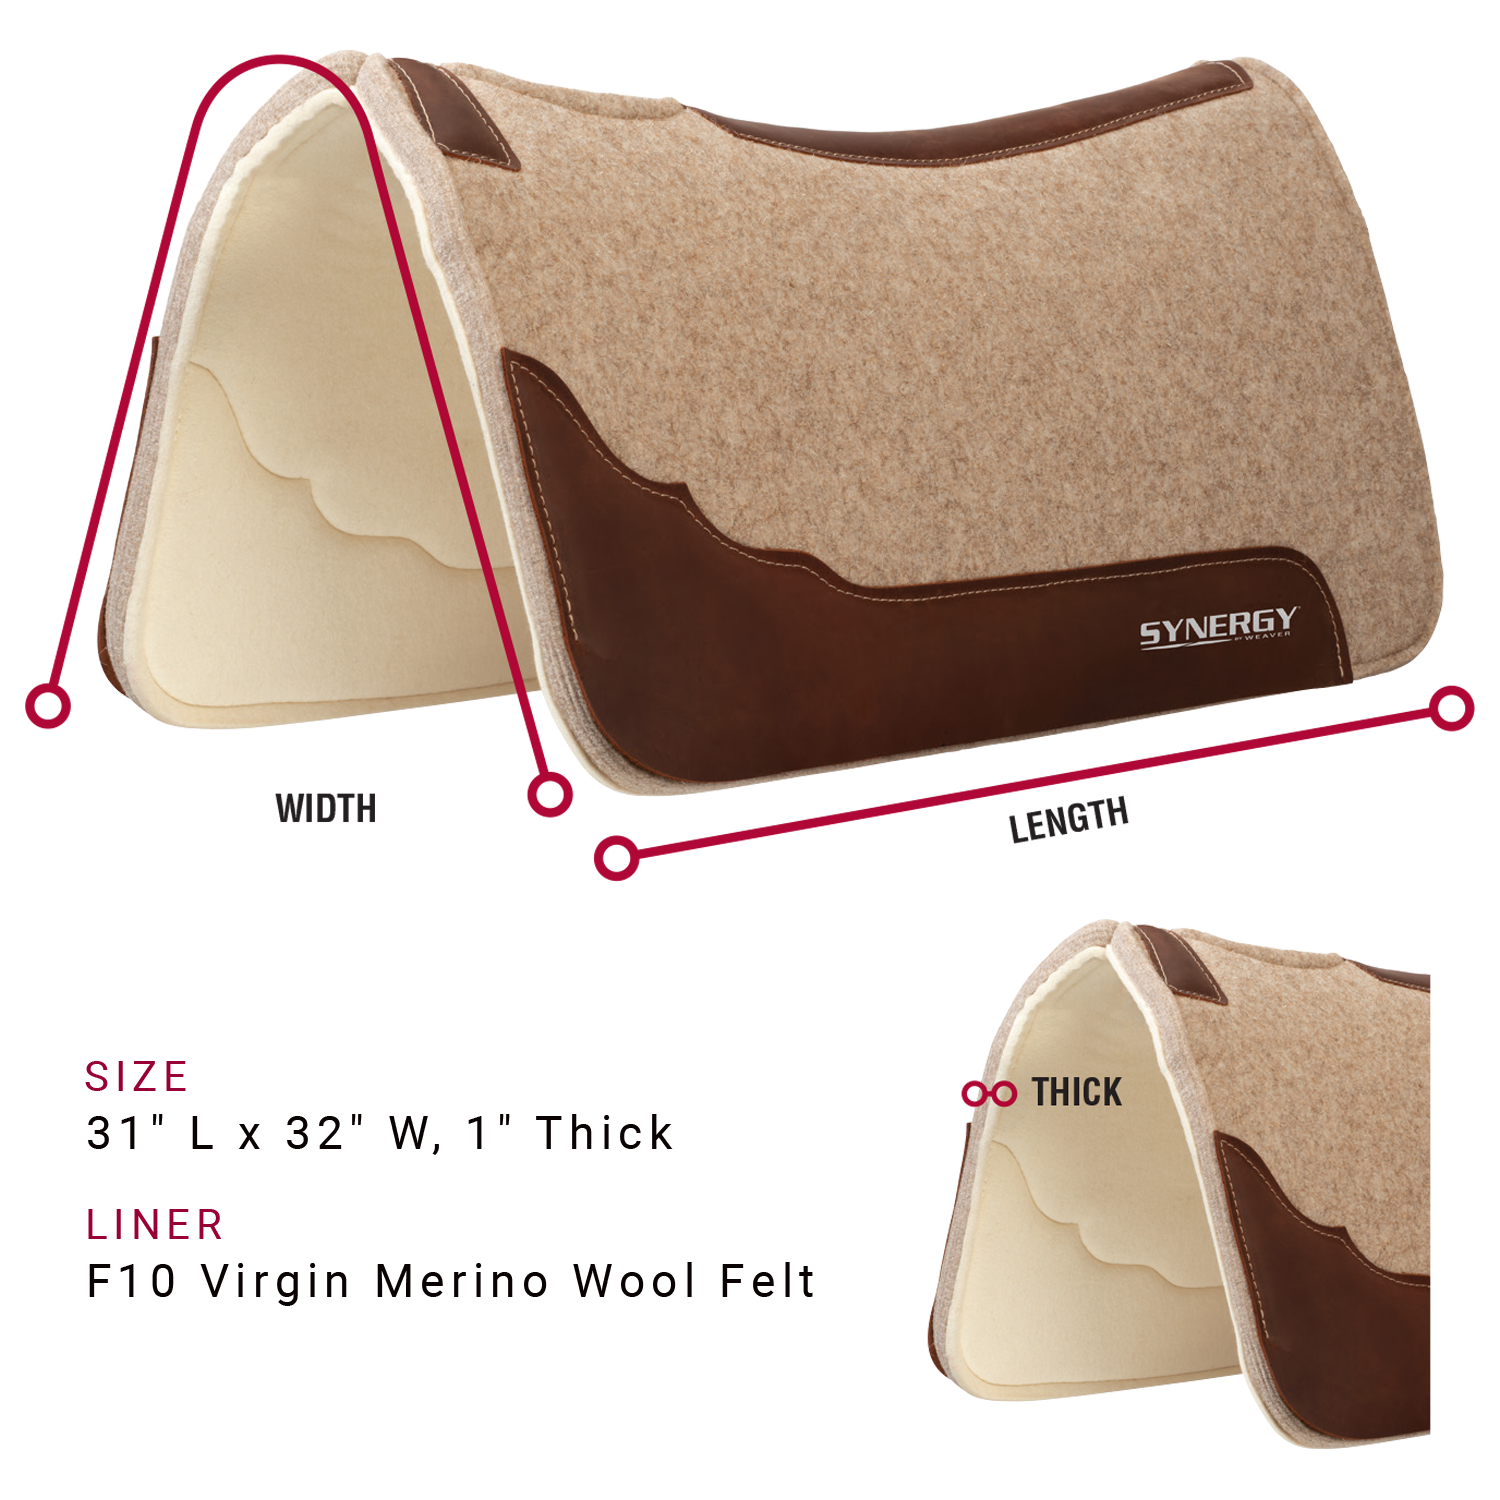 Saddle pad is available in the following sizes: 31 inches long by 32 inches wide, 1 inch thick. Saddle pad is available with a F10 Virgin Merino Wool Felt liner